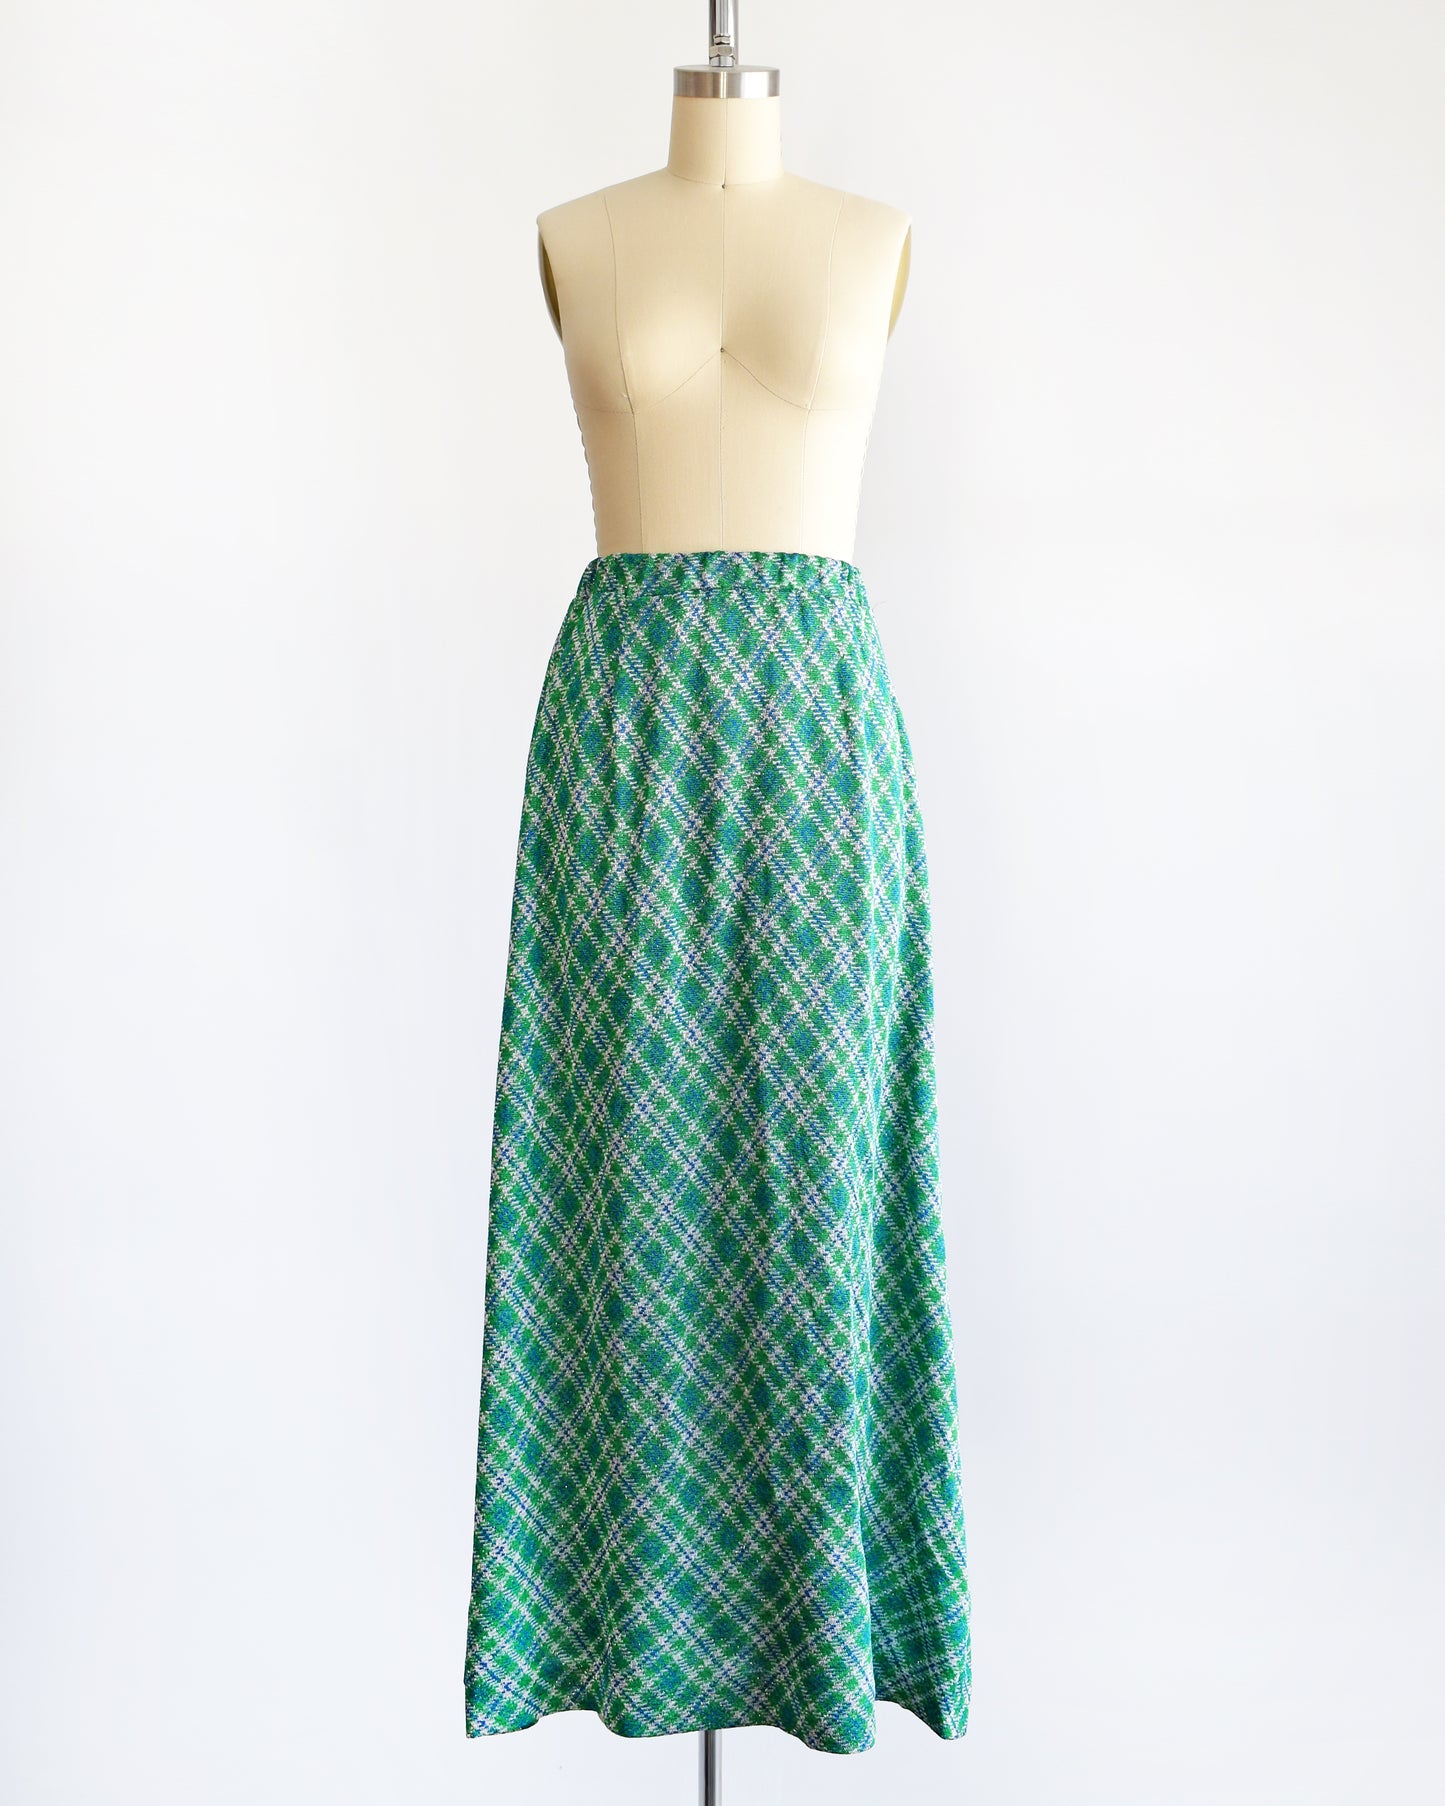 A vintage 1970s maxi skirt that features festive green, blue, and white plaid fabric with silver metallic threads.